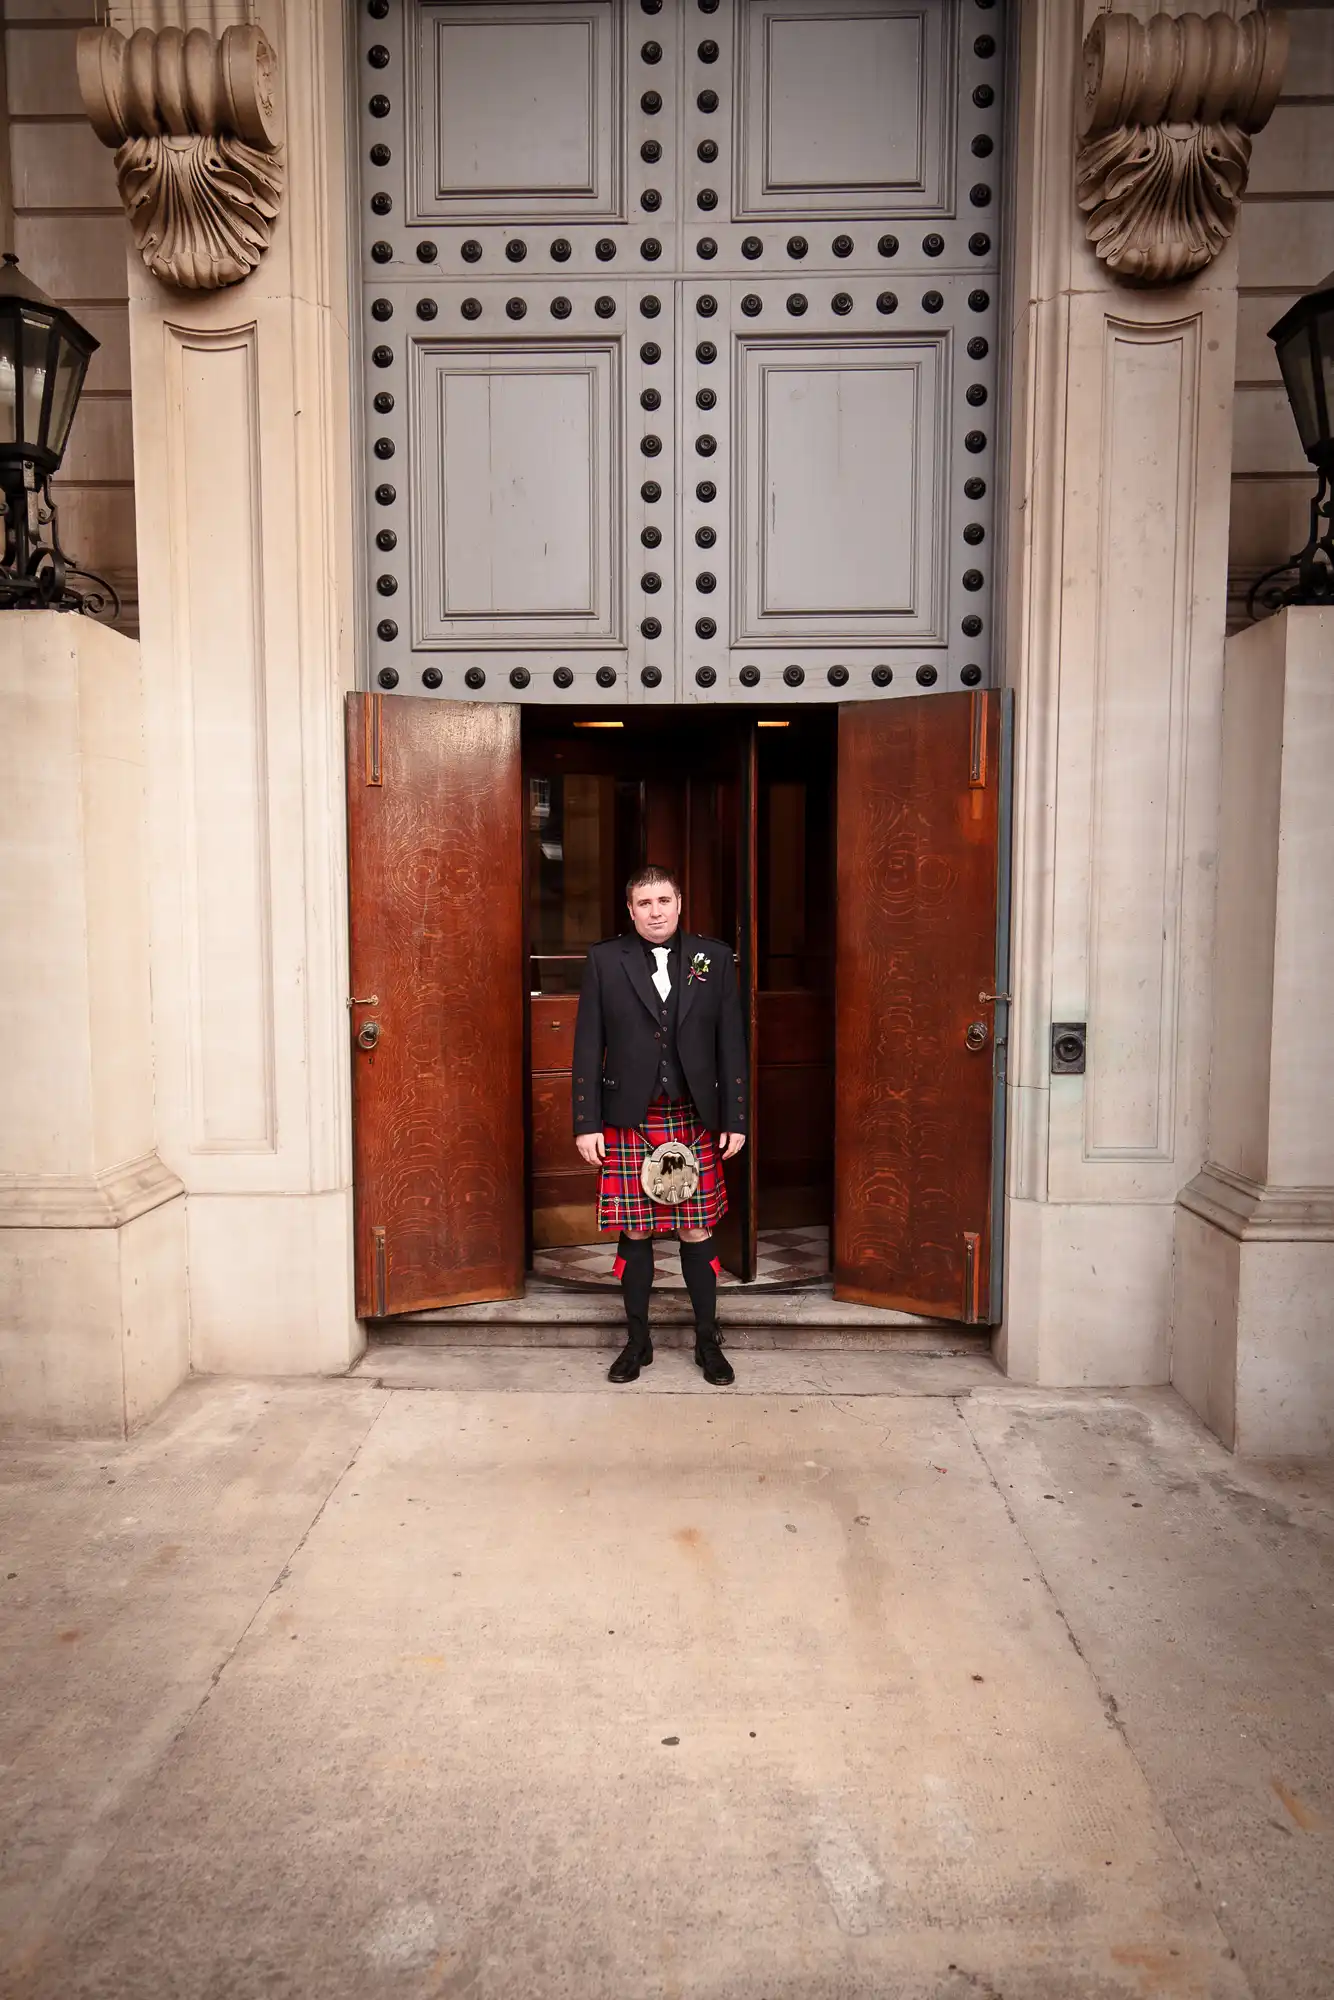 A man in a traditional scottish outfit with a kilt and sporran stands in front of large ornate doors of a building.